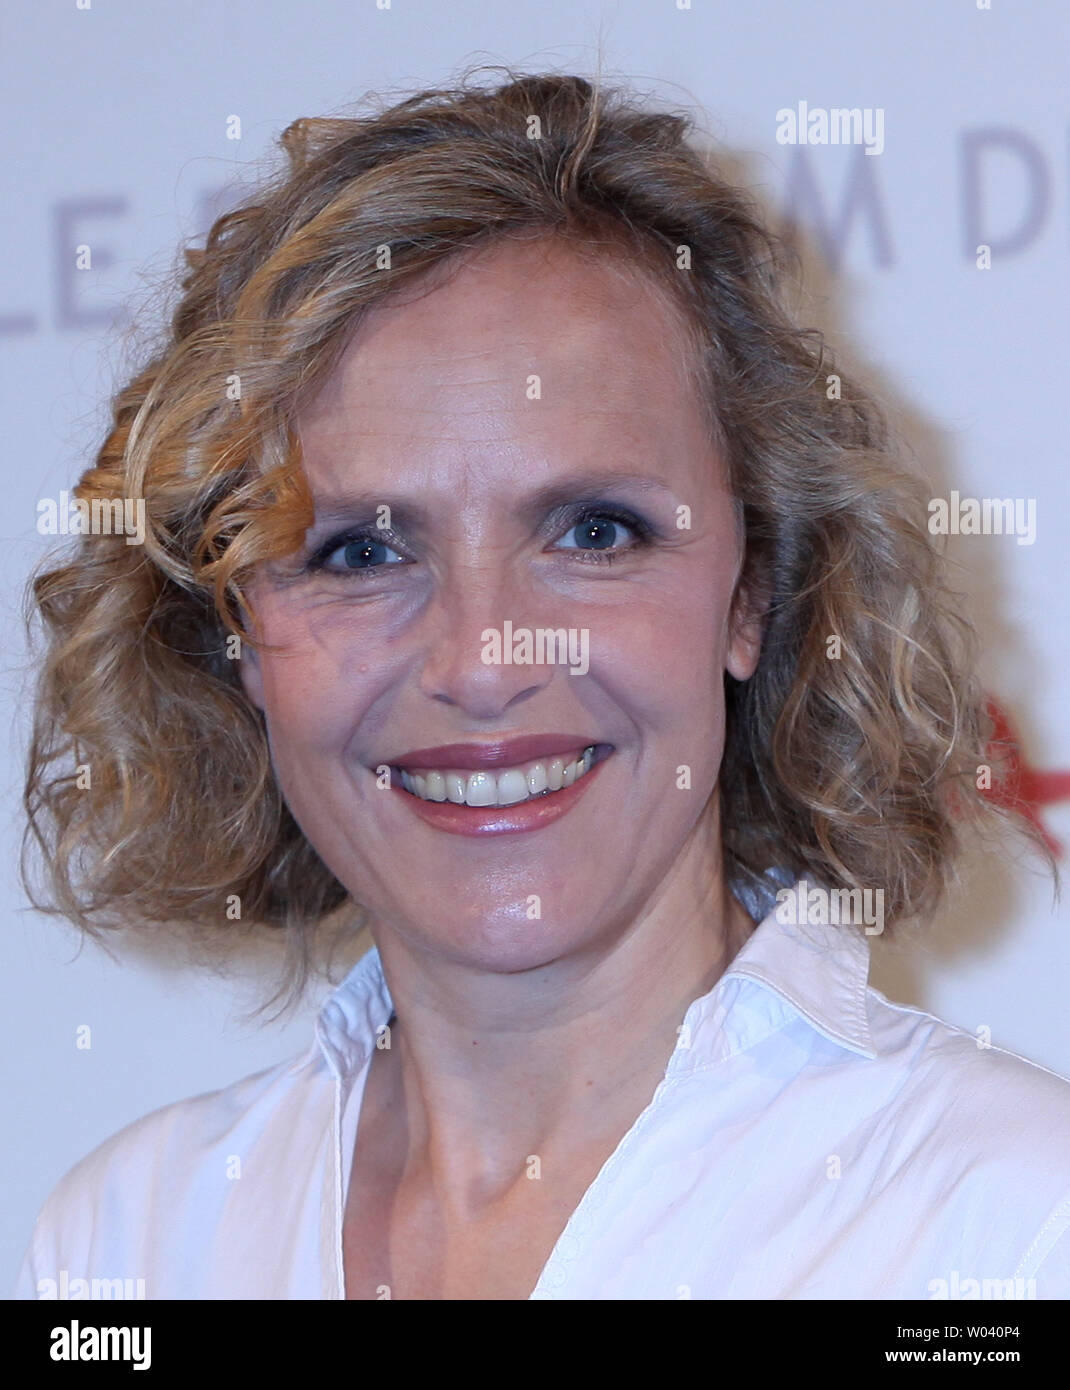 Juliane Kohler arrives at a photocall for the film 'Una Vita Tranquilla (A Quiet Life)' during the 5th Rome International Film Festival in Rome on November 1, 2010.   UPI/David Silpa Stock Photo